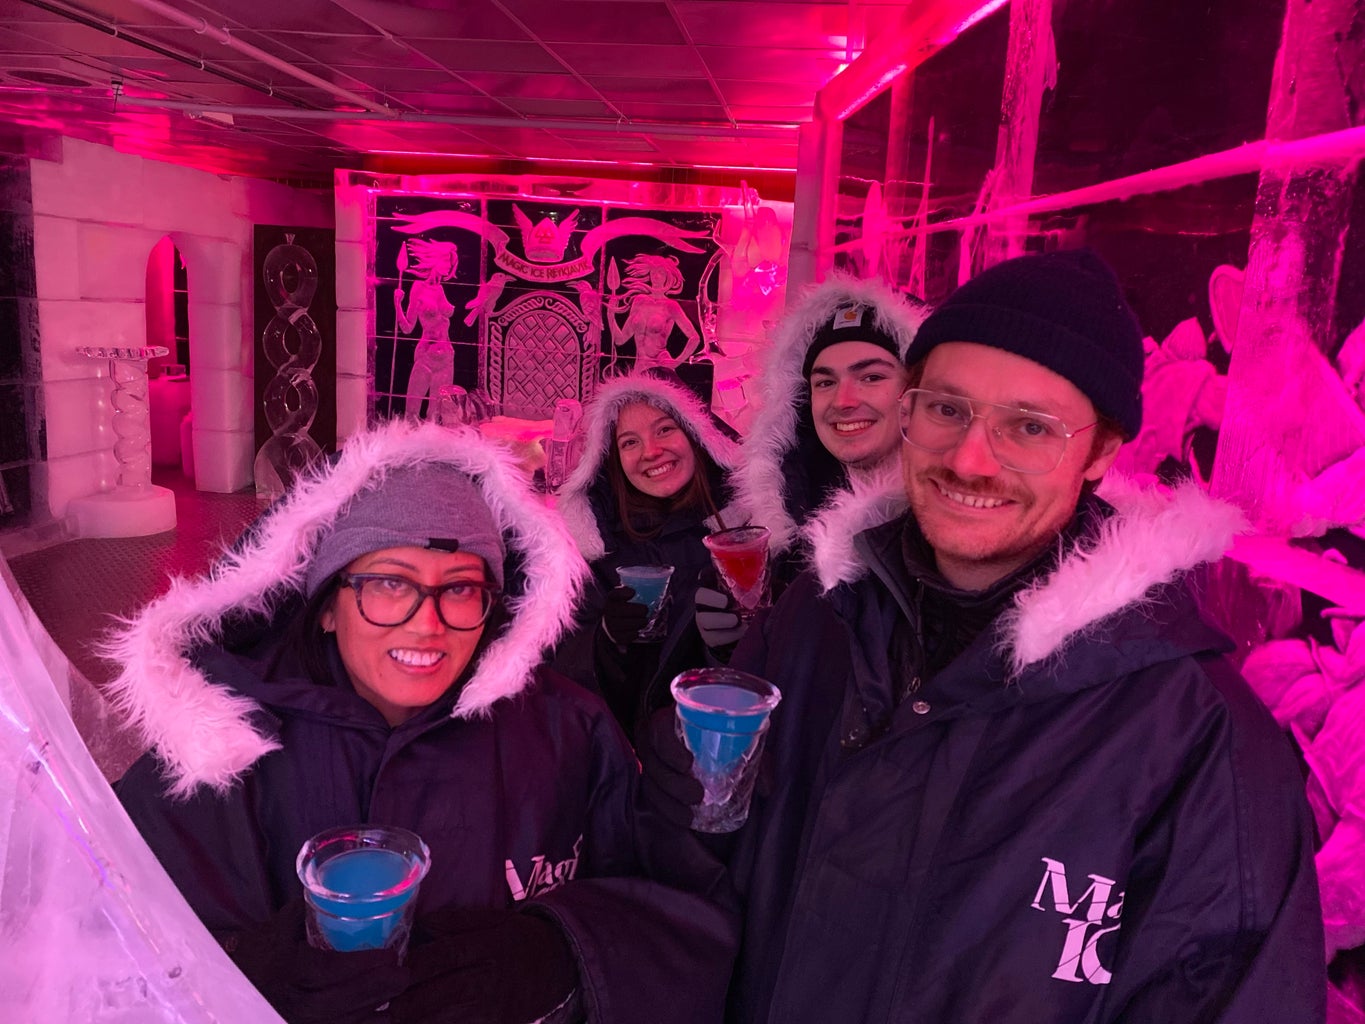 Parents and boyfriend and I at Ice bar